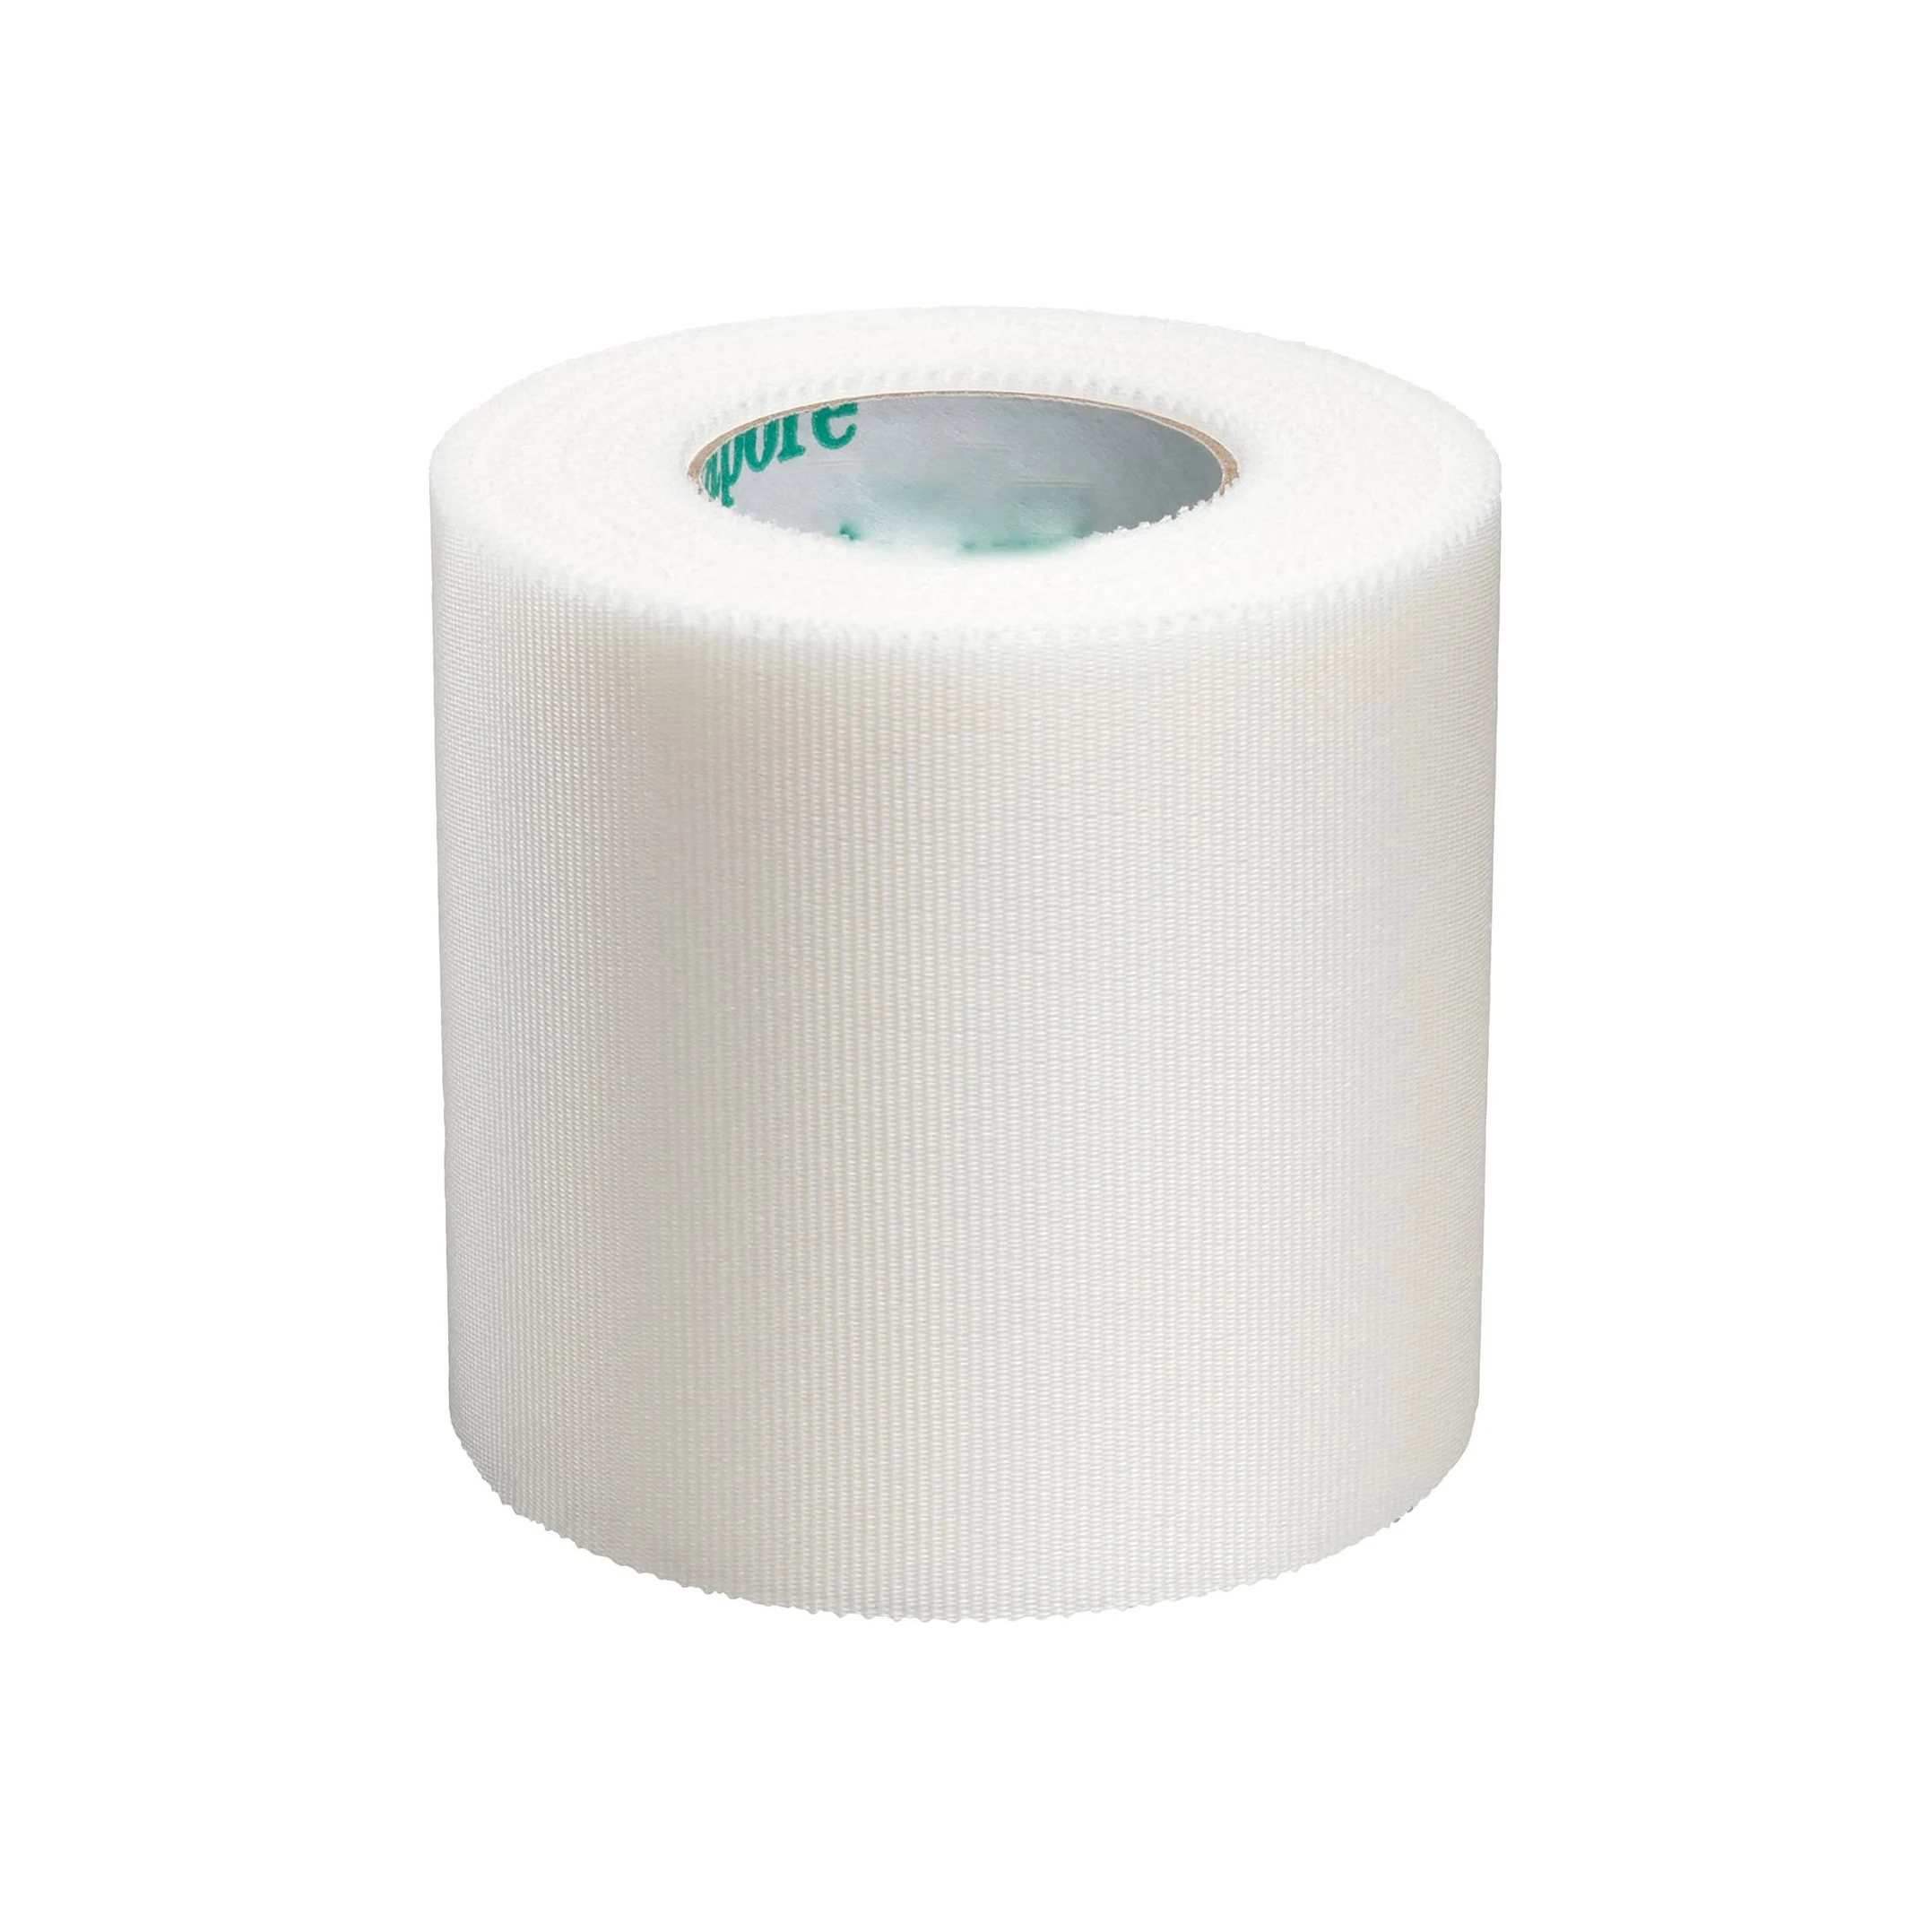 High quality China supplier medical tape silk tape surgical tape OEM size and packaging (1600206691464)